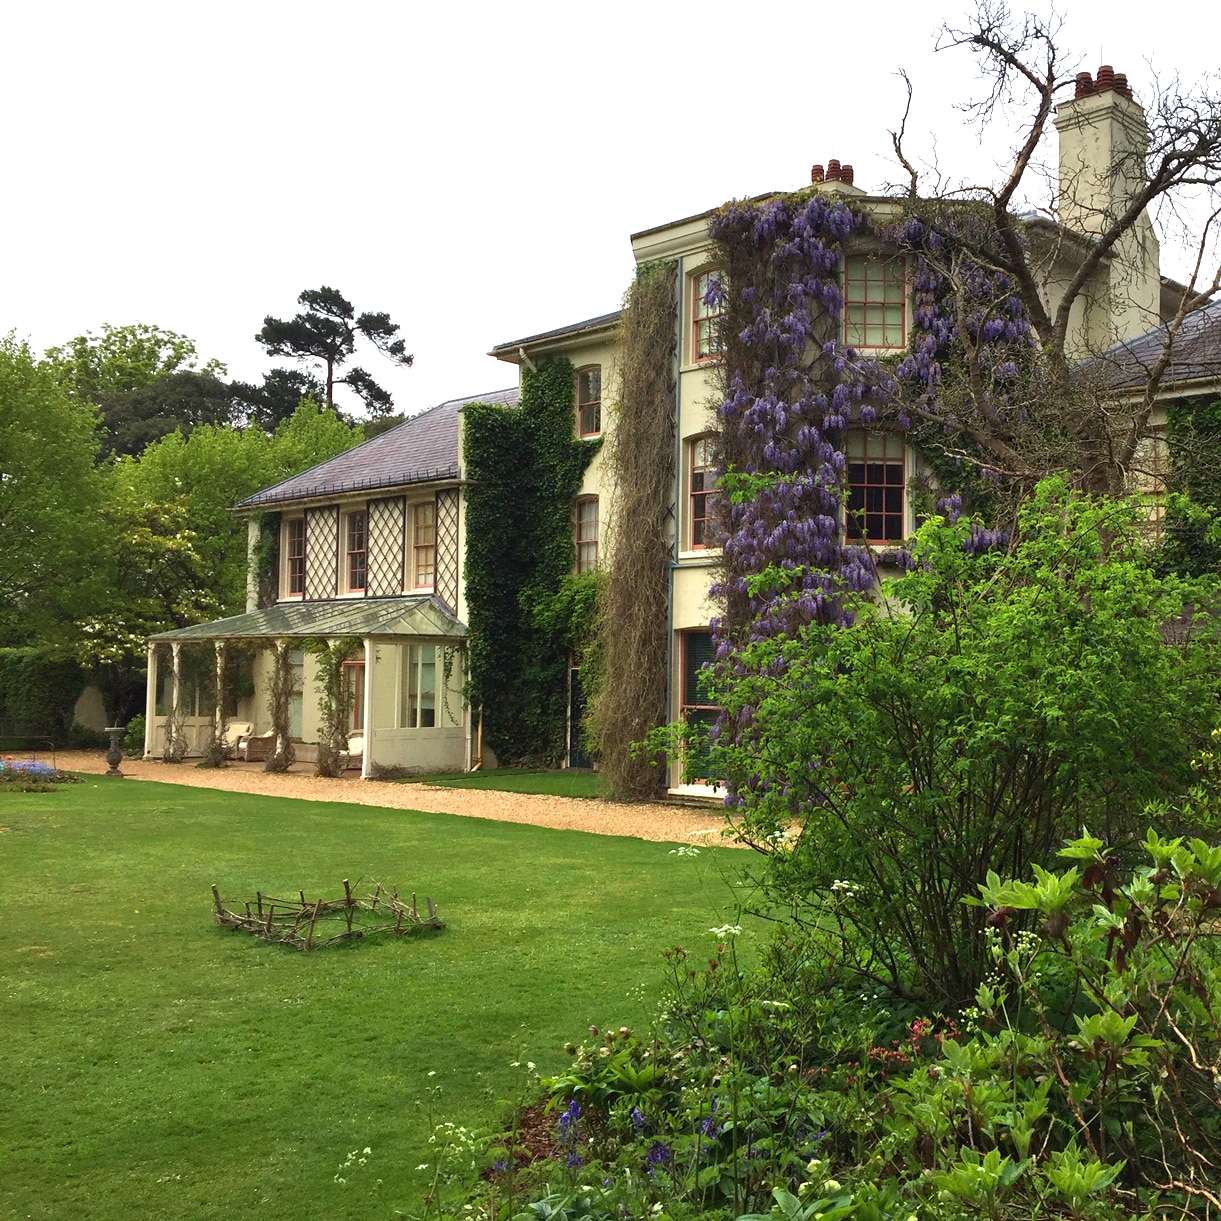 Large house with wisteria growing over it.